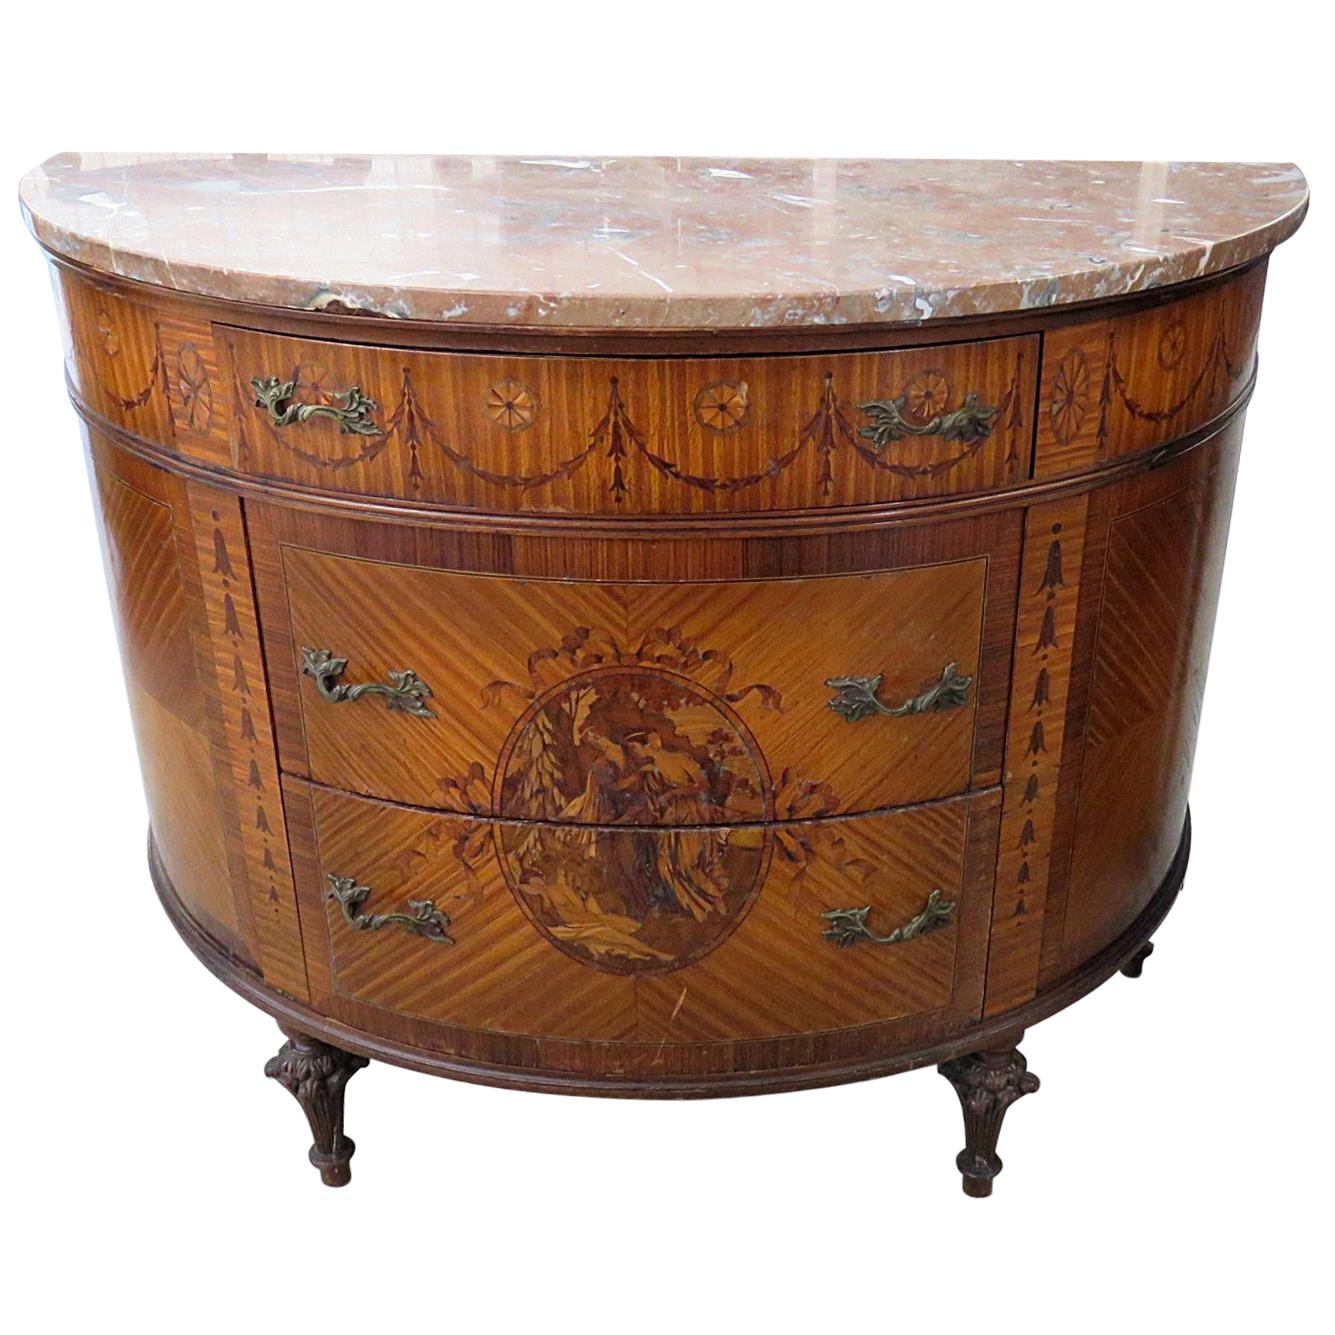 Adams Style Inlaid Satinwood Marble Top Demilune Commode Buffet Dresser